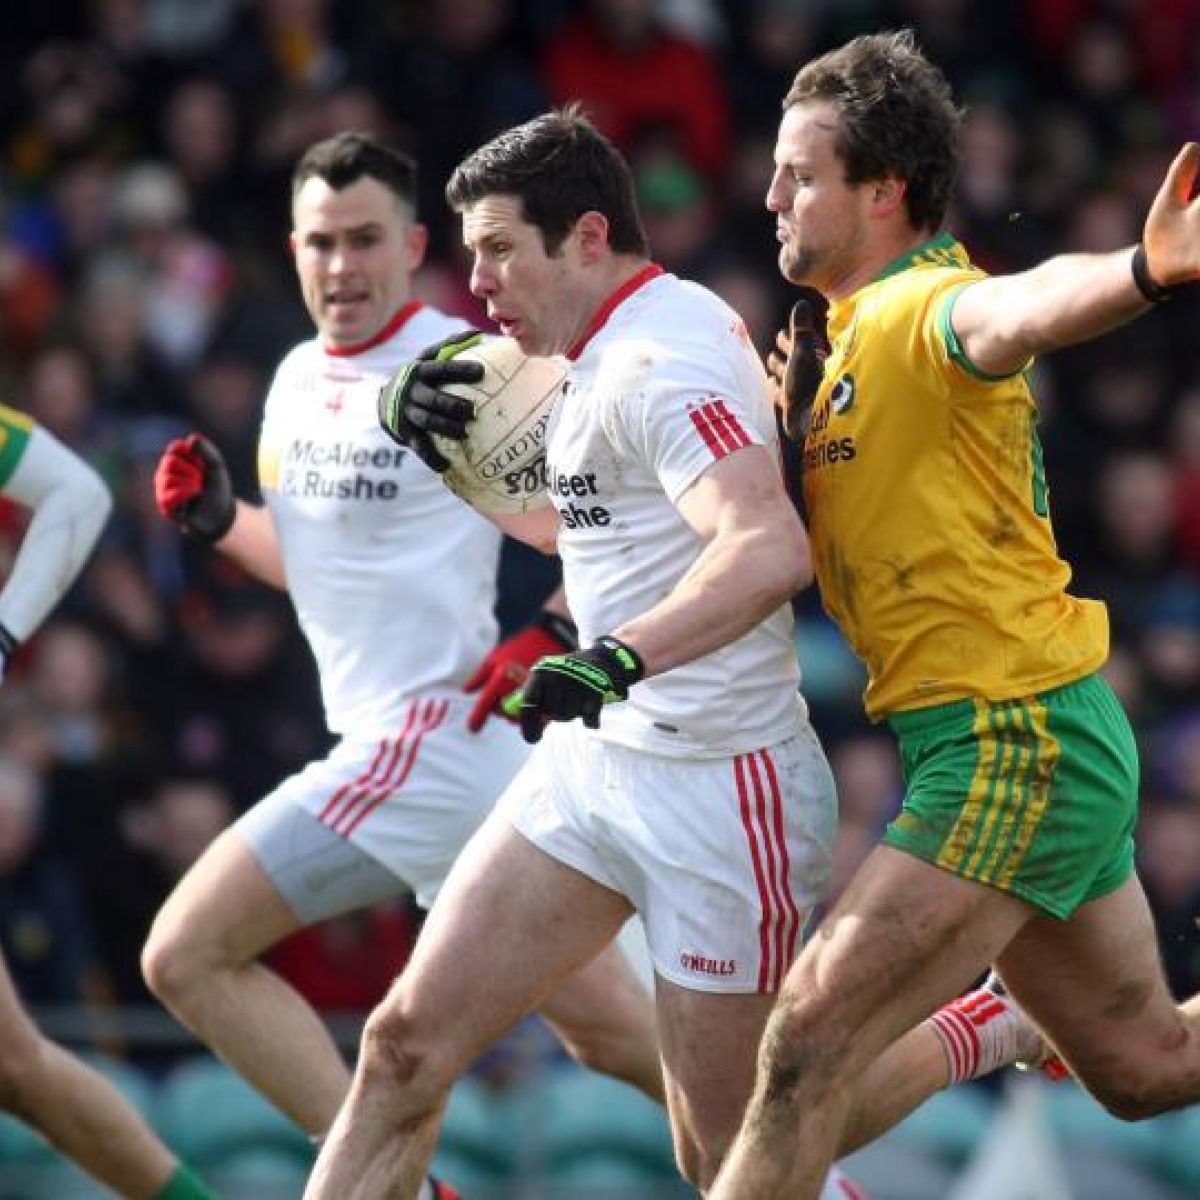 Sean Cavanagh Named To Start For Tyrone As Niall Morgan Also In